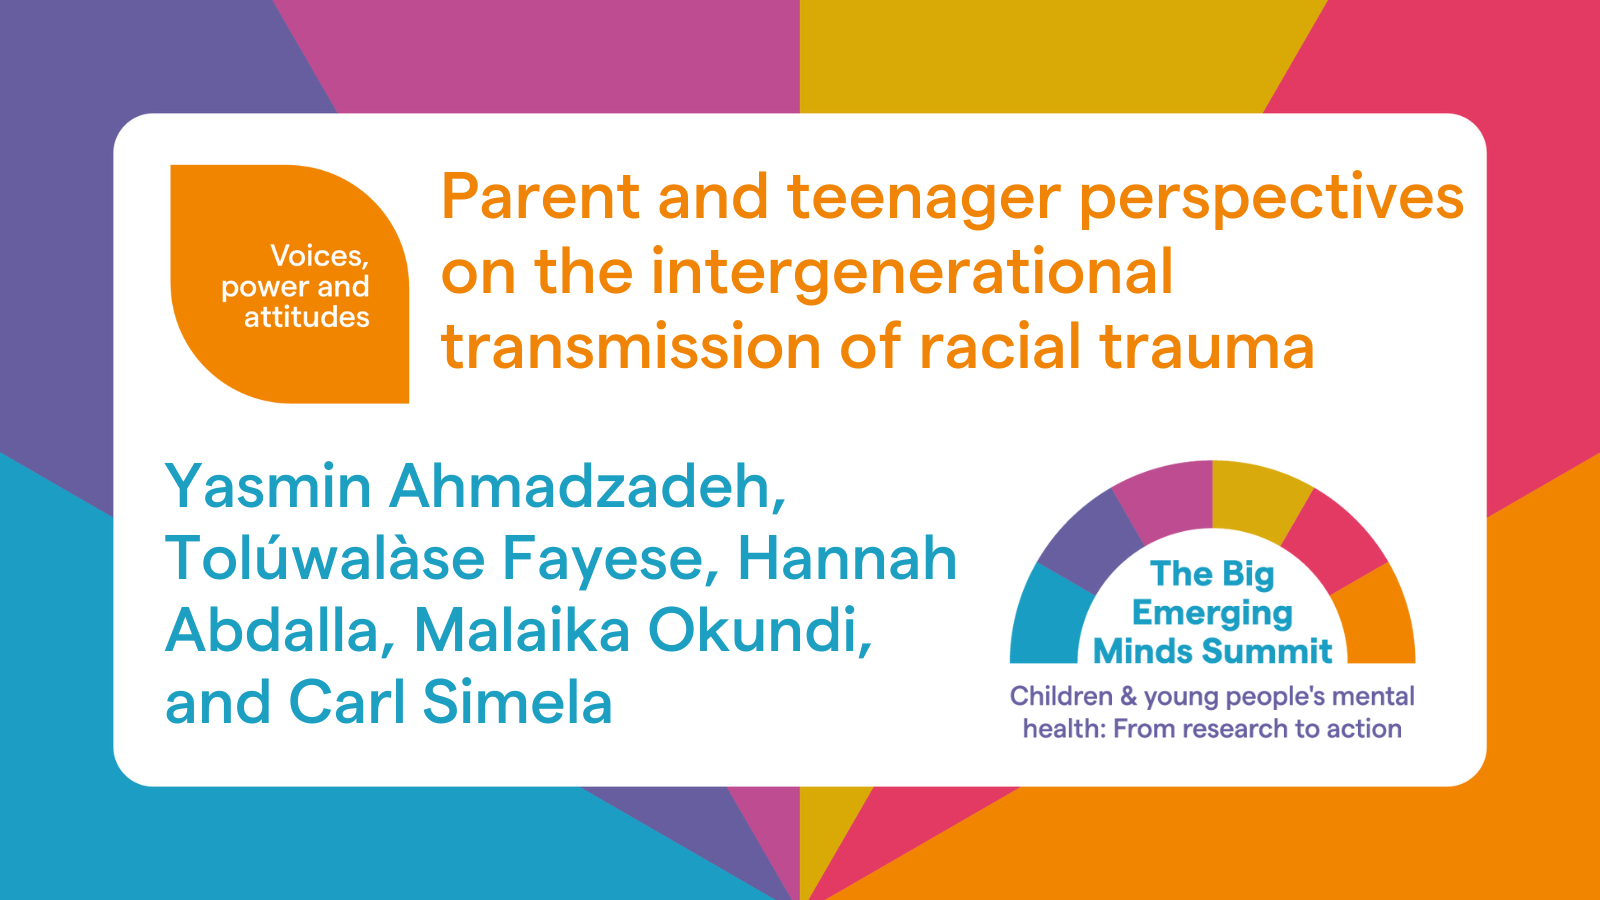 Parent and teenager perspectives on the intergenerational transmission of racial trauma